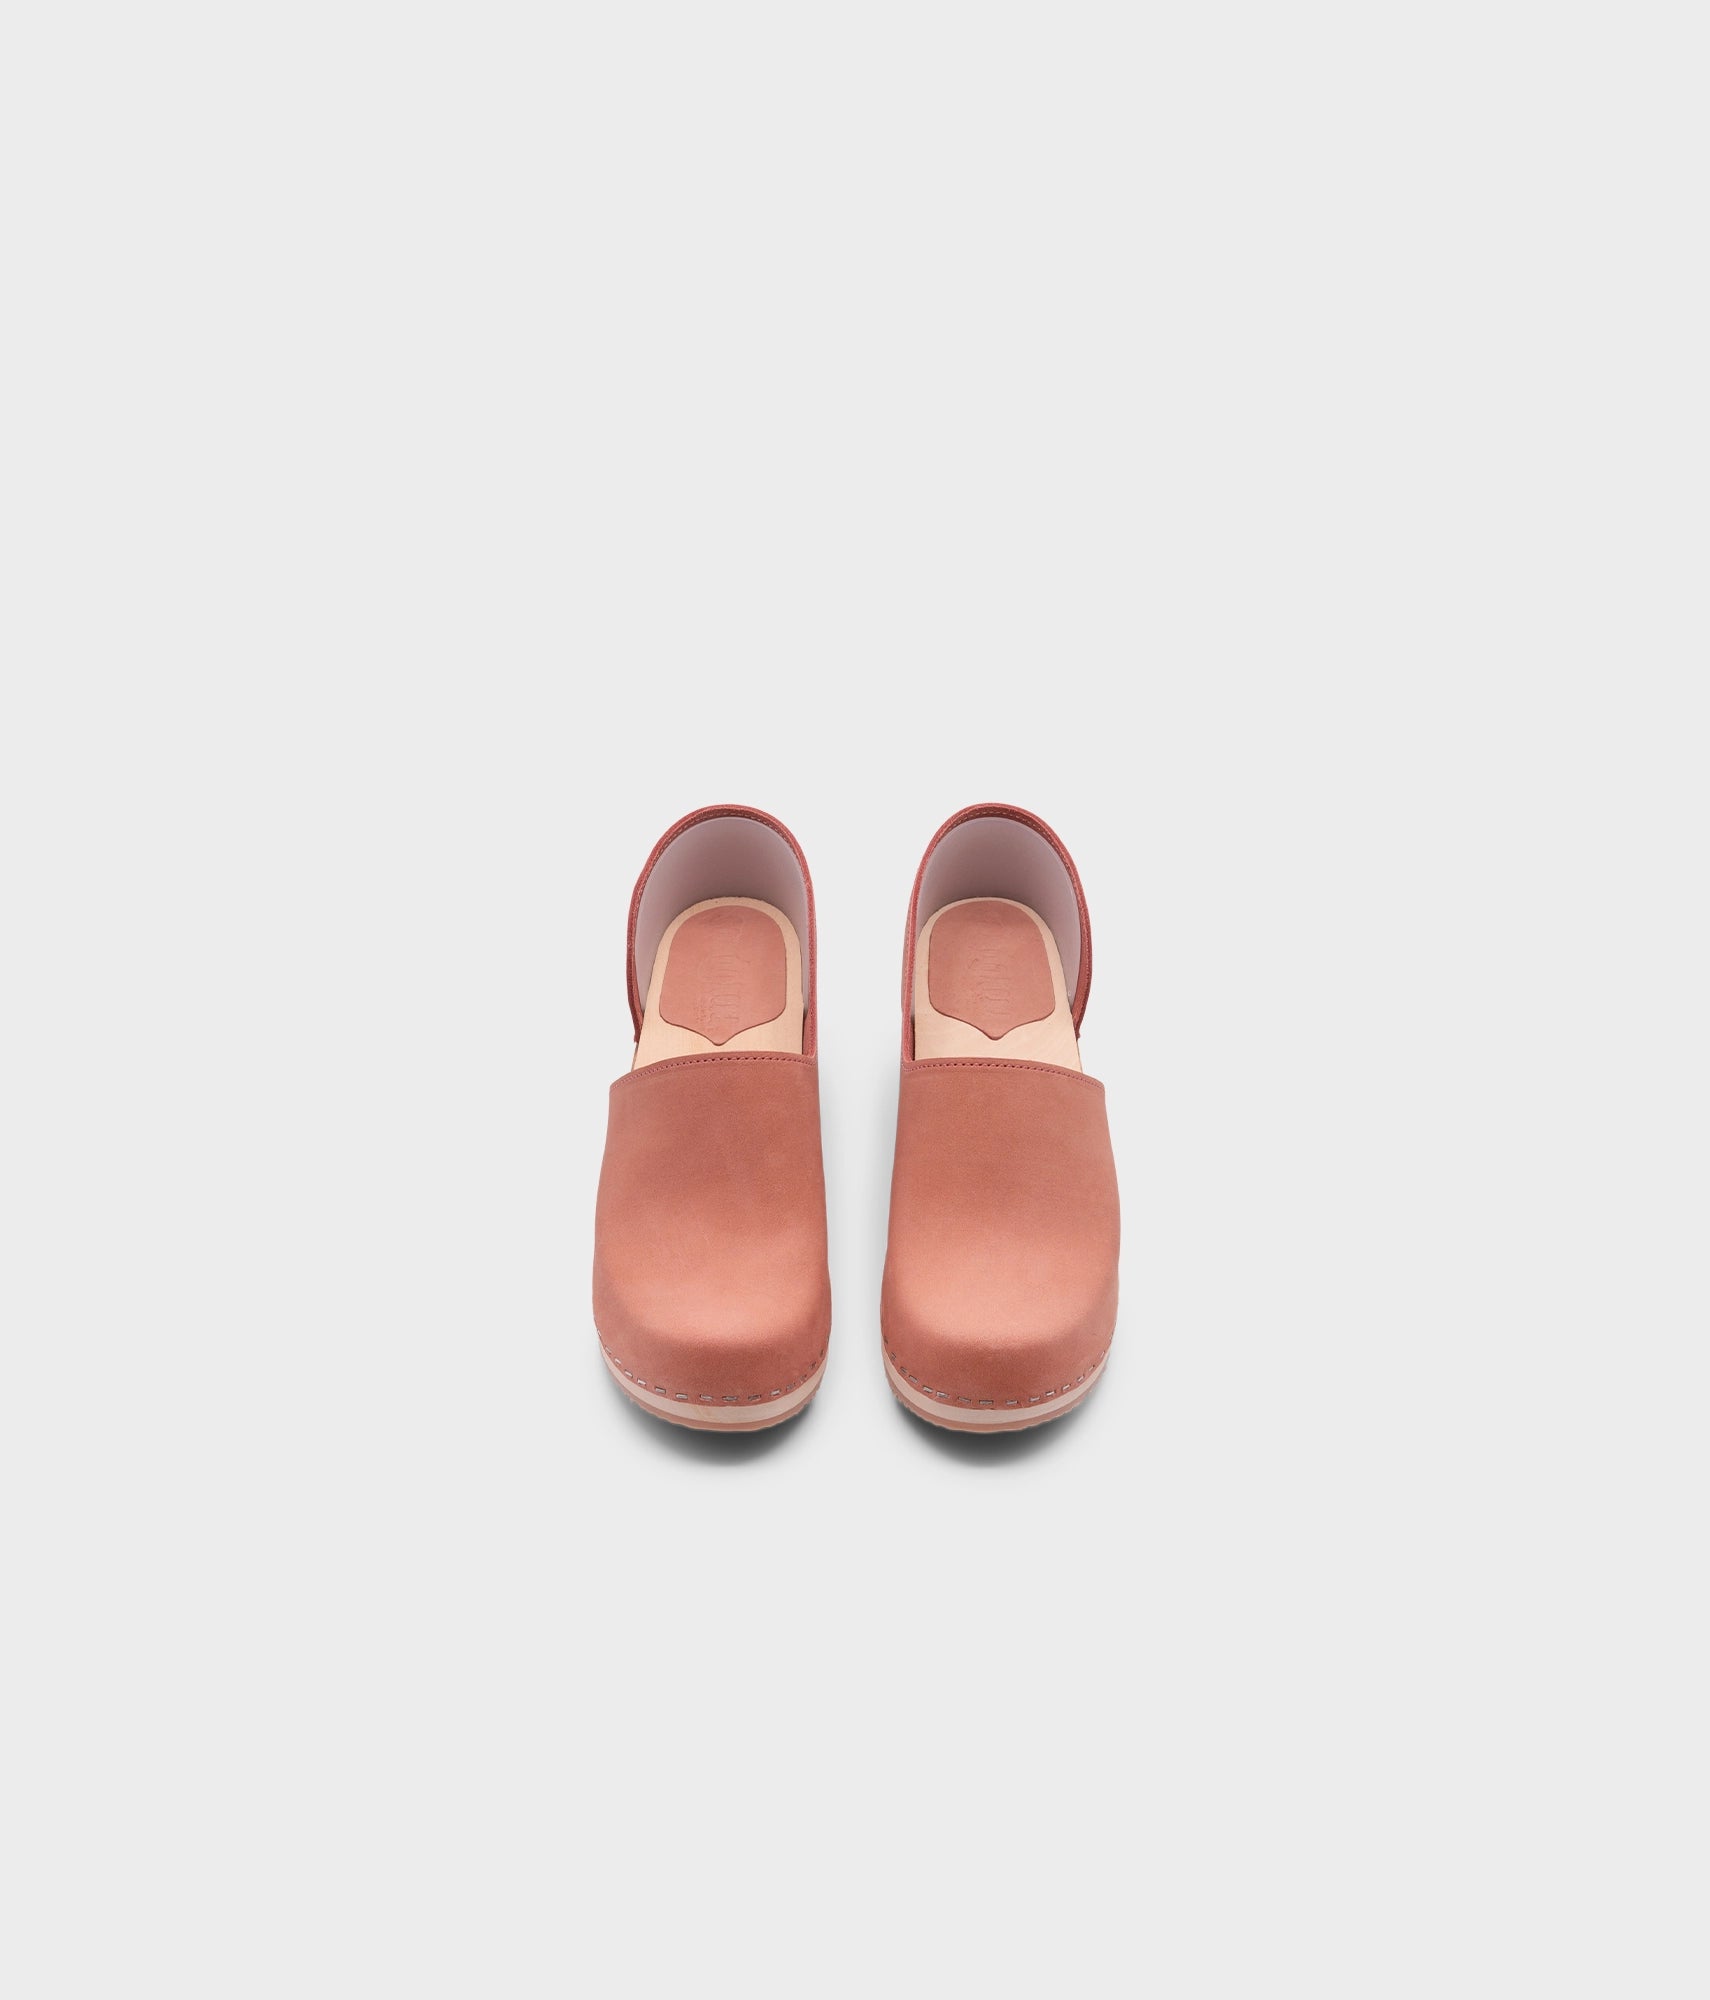 high heeled closed-back clogs in blush pink nubuck leather stapled on a light wooden base